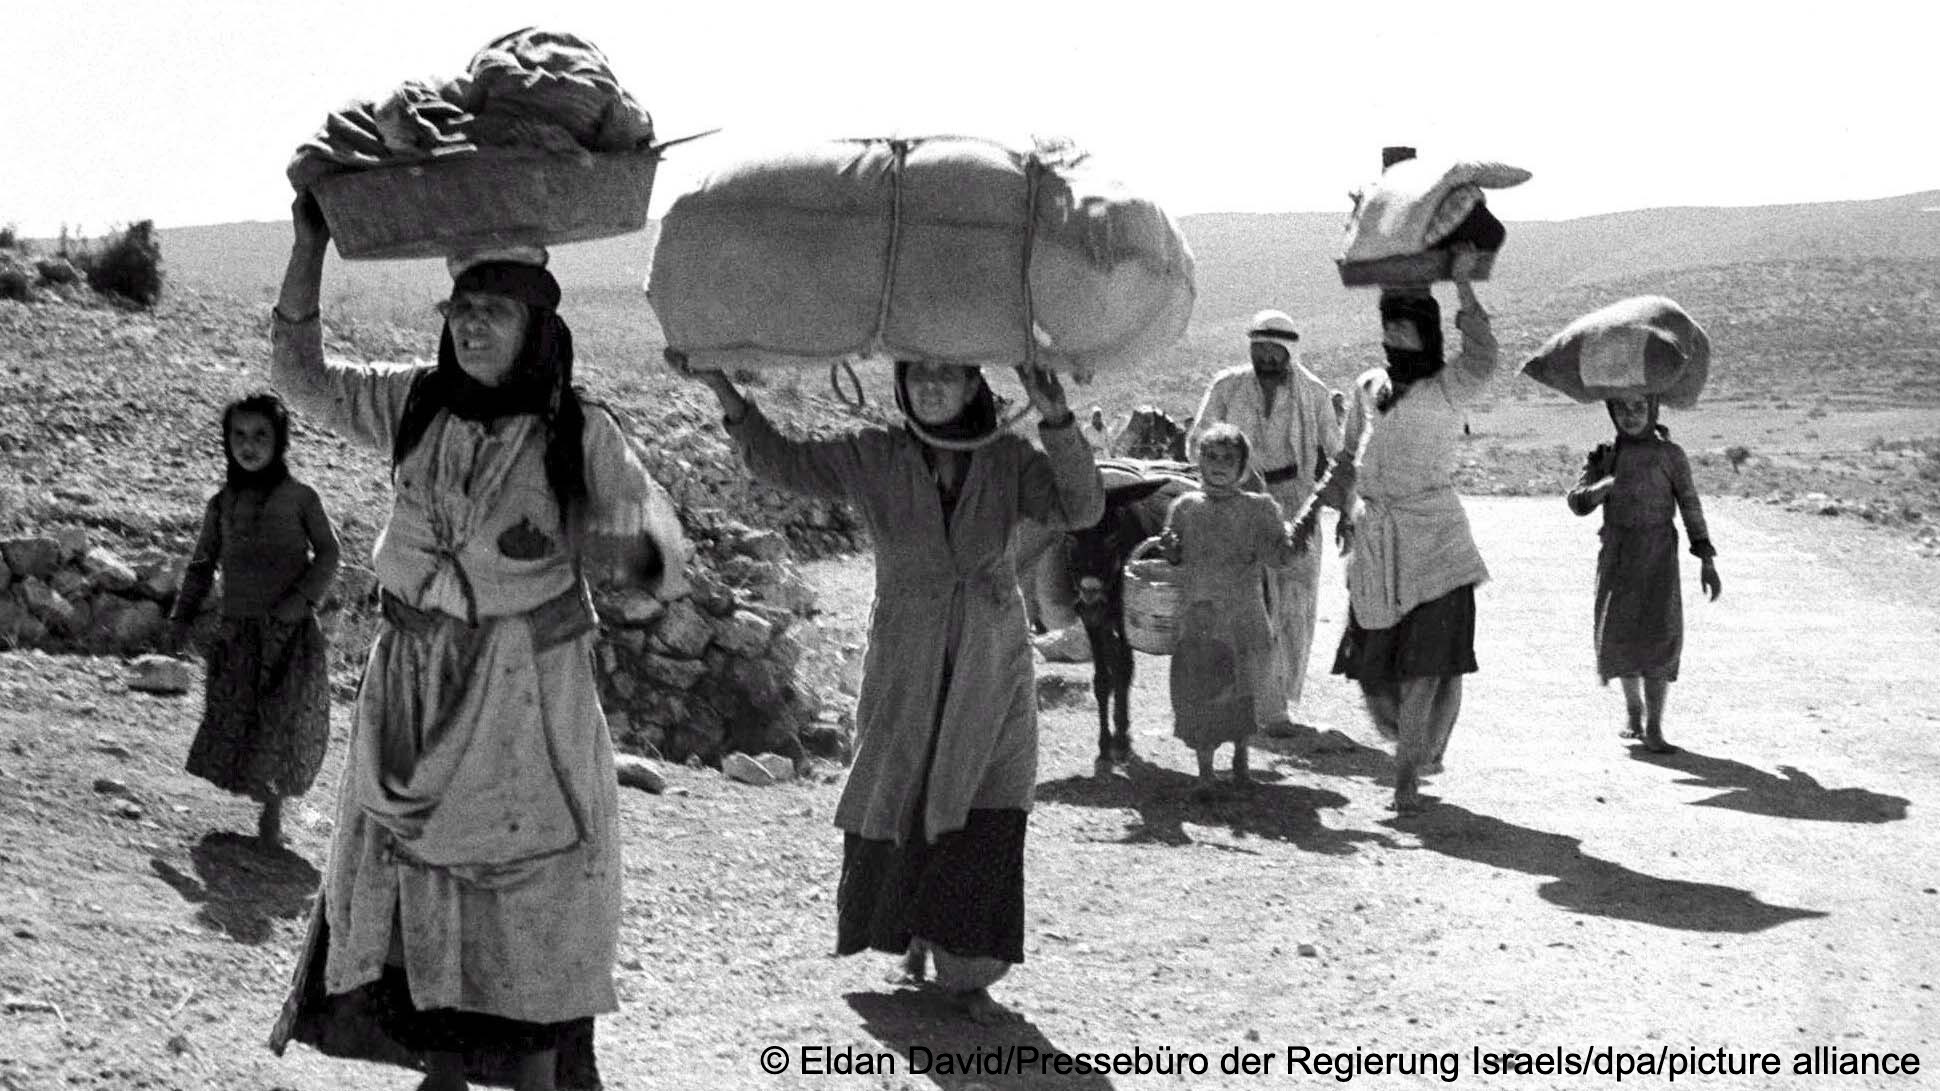 Palestinians carry as many belongings as possible as they flee their homes on 14 May 1948, unknown location in Israel (photo: Eldan David/Pressebüro der Regierung Israels/dpa/picture alliance)